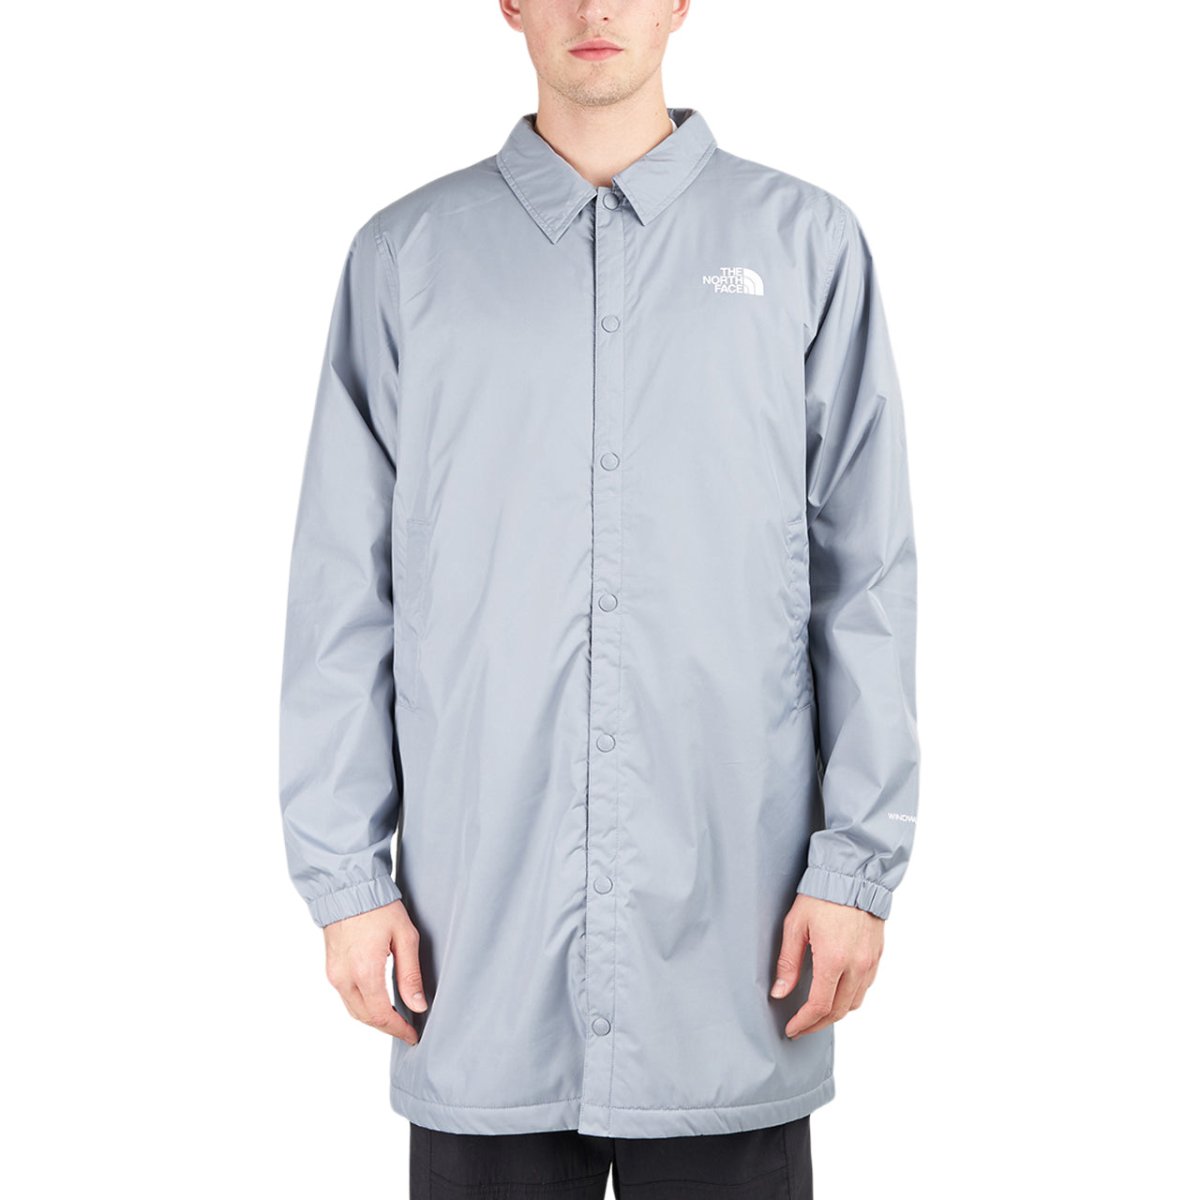 Image of The North Face Telegraphic Coaches Jacket (Grey)